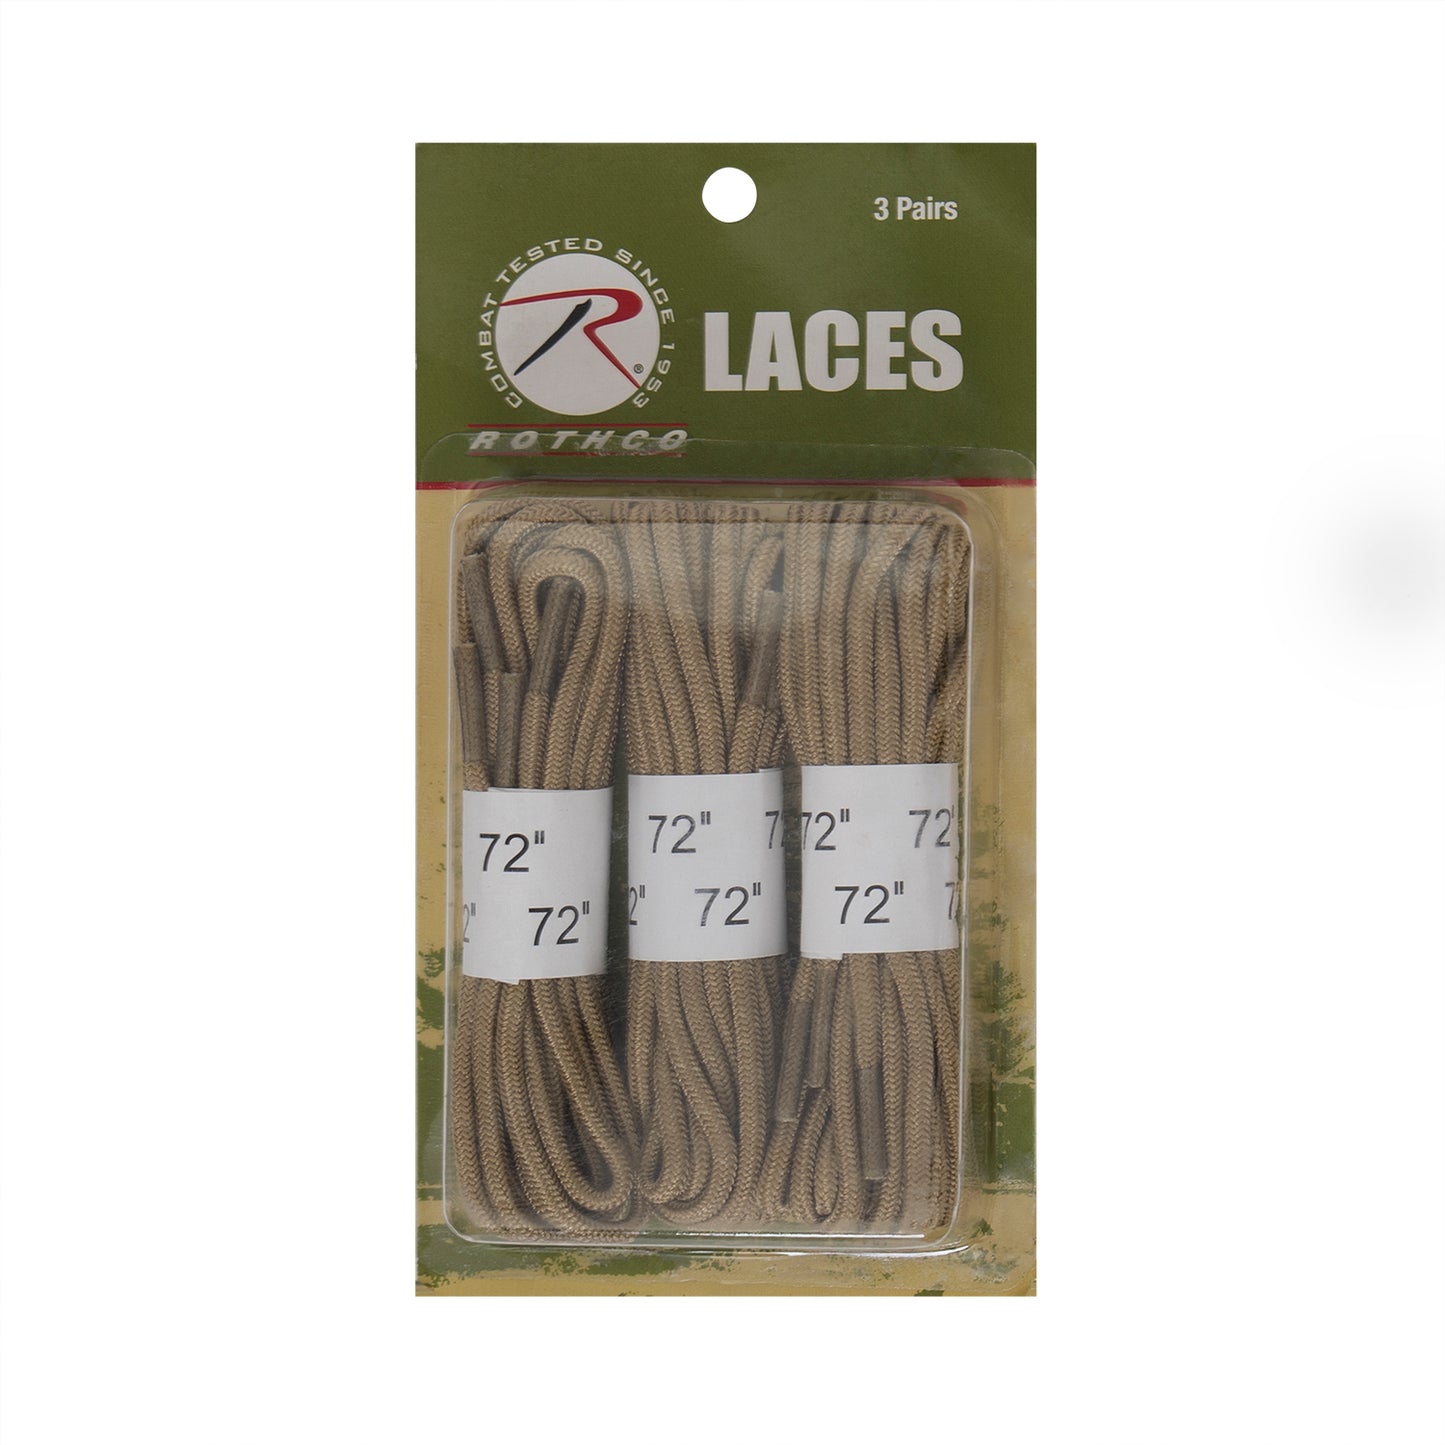 Rothco’s Boot Laces are perfect for military, tactical, and law enforcement personnel and come in a convenient three-pack.   Boot Laces Are Perfect Replacement Laces For Any Tactical Boot Constructed With Long-Lasting Polyamide (Black Laces Are Made Of Nylon) Heat Formed Tips Prevent Fraying 3 Pairs Of Shoes Laces Per Package 72 Inches In Length